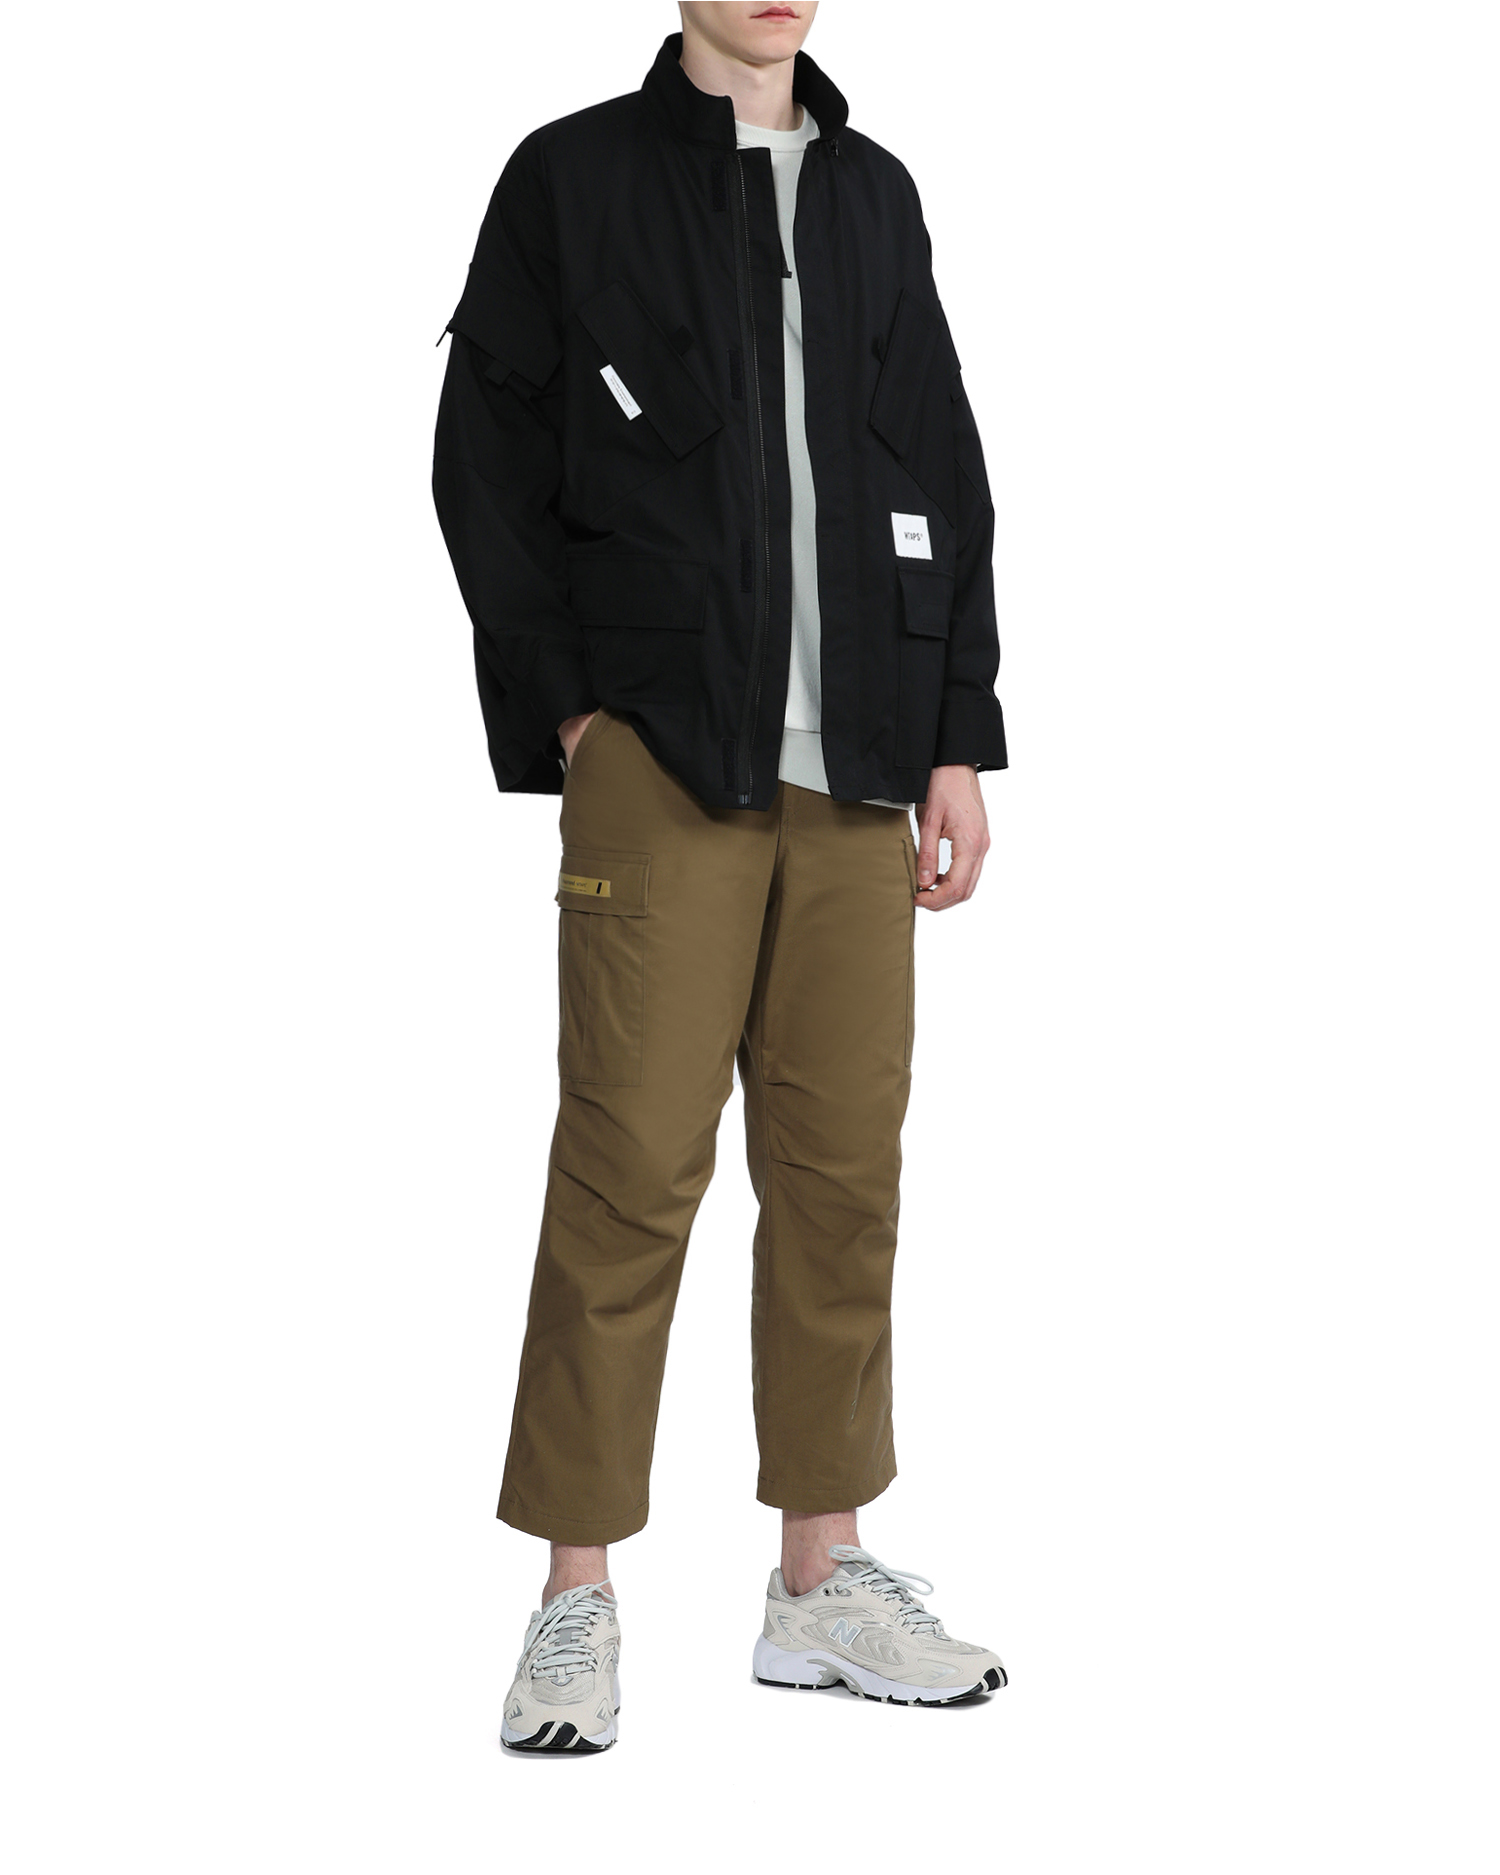 wtaps 22ss CONCEAL JACKET / COPO WEATHER